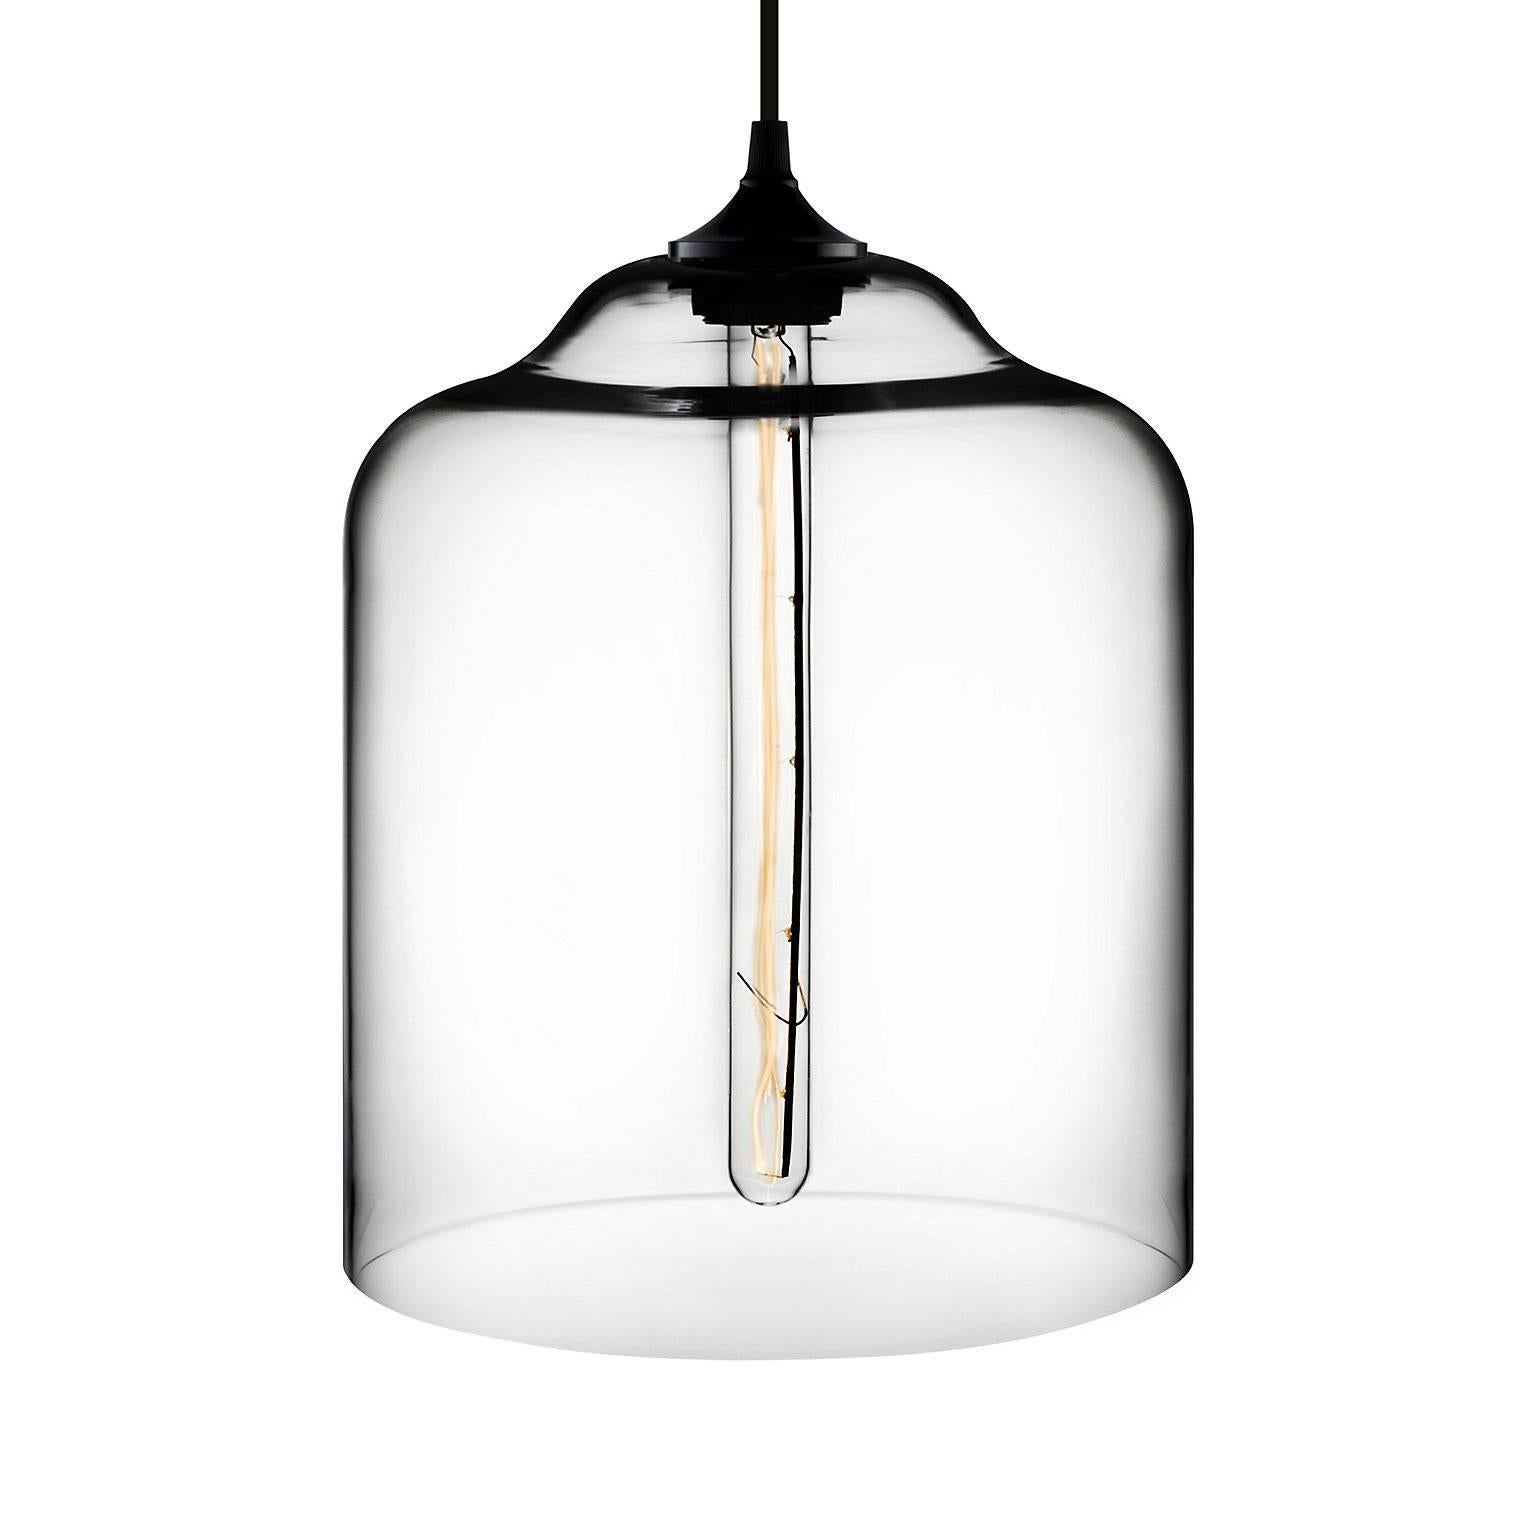 American Bell Jar Gray Handblown Modern Glass Pendant Light, Made in the USA For Sale